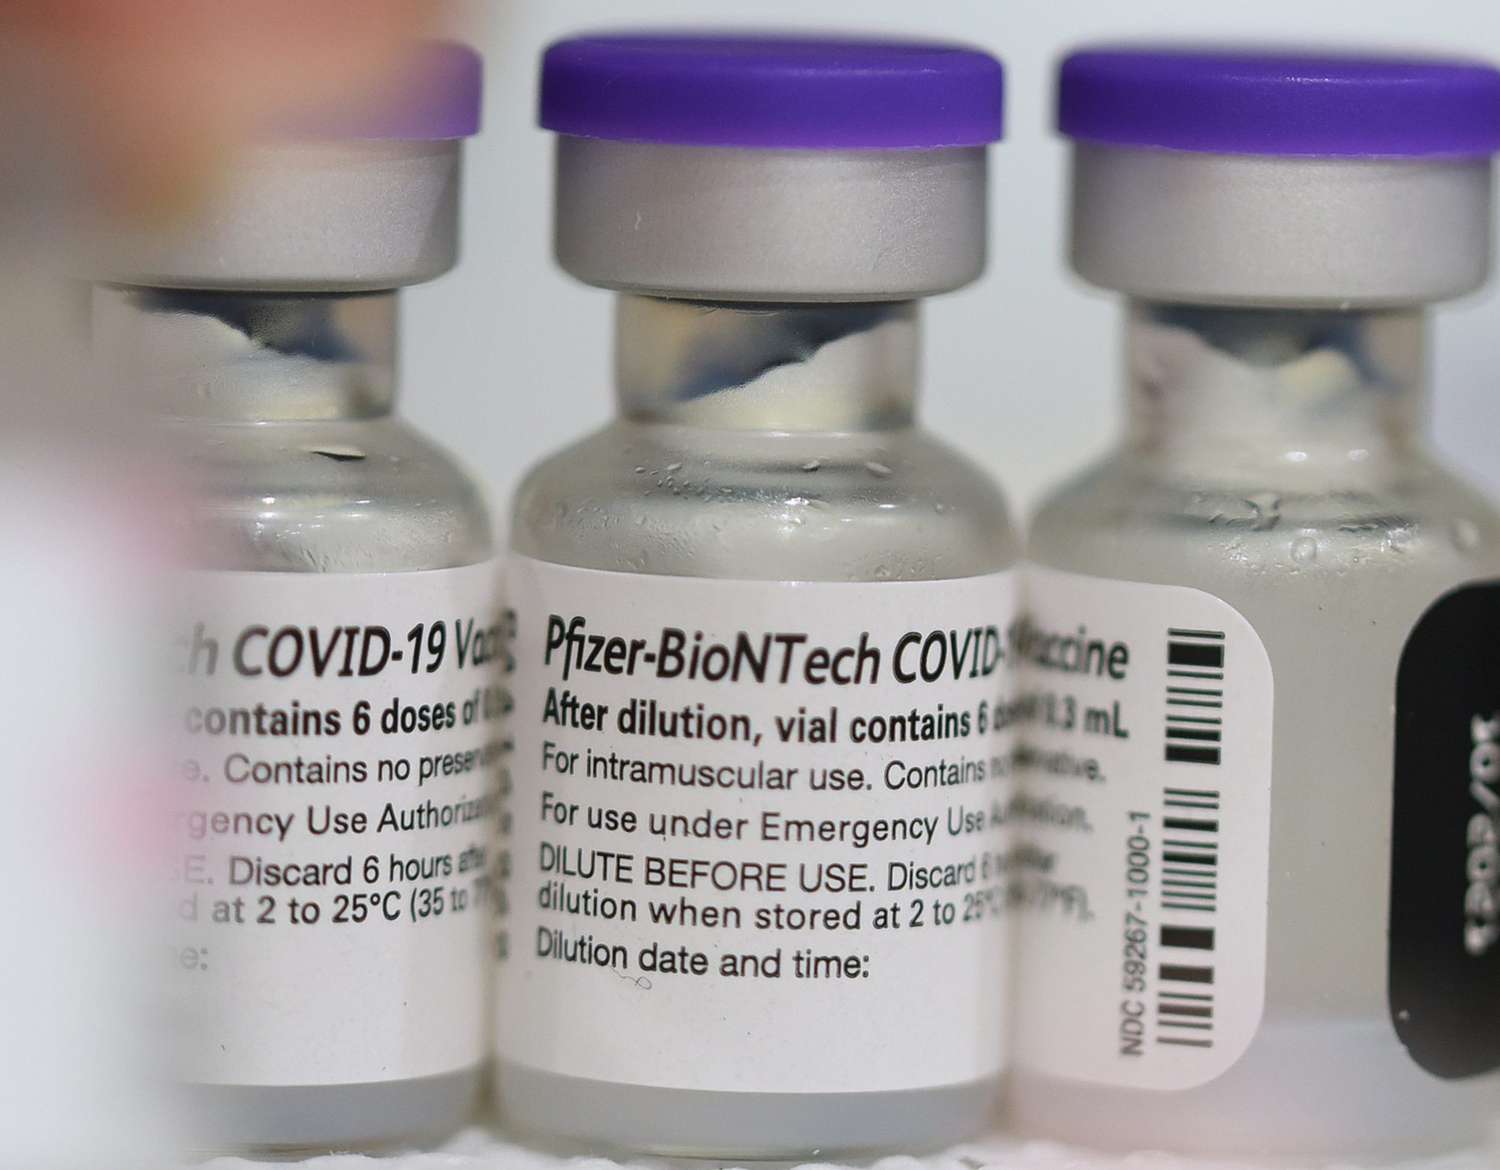 Vials of the Pfizer COVID-19 vaccine are seen at a